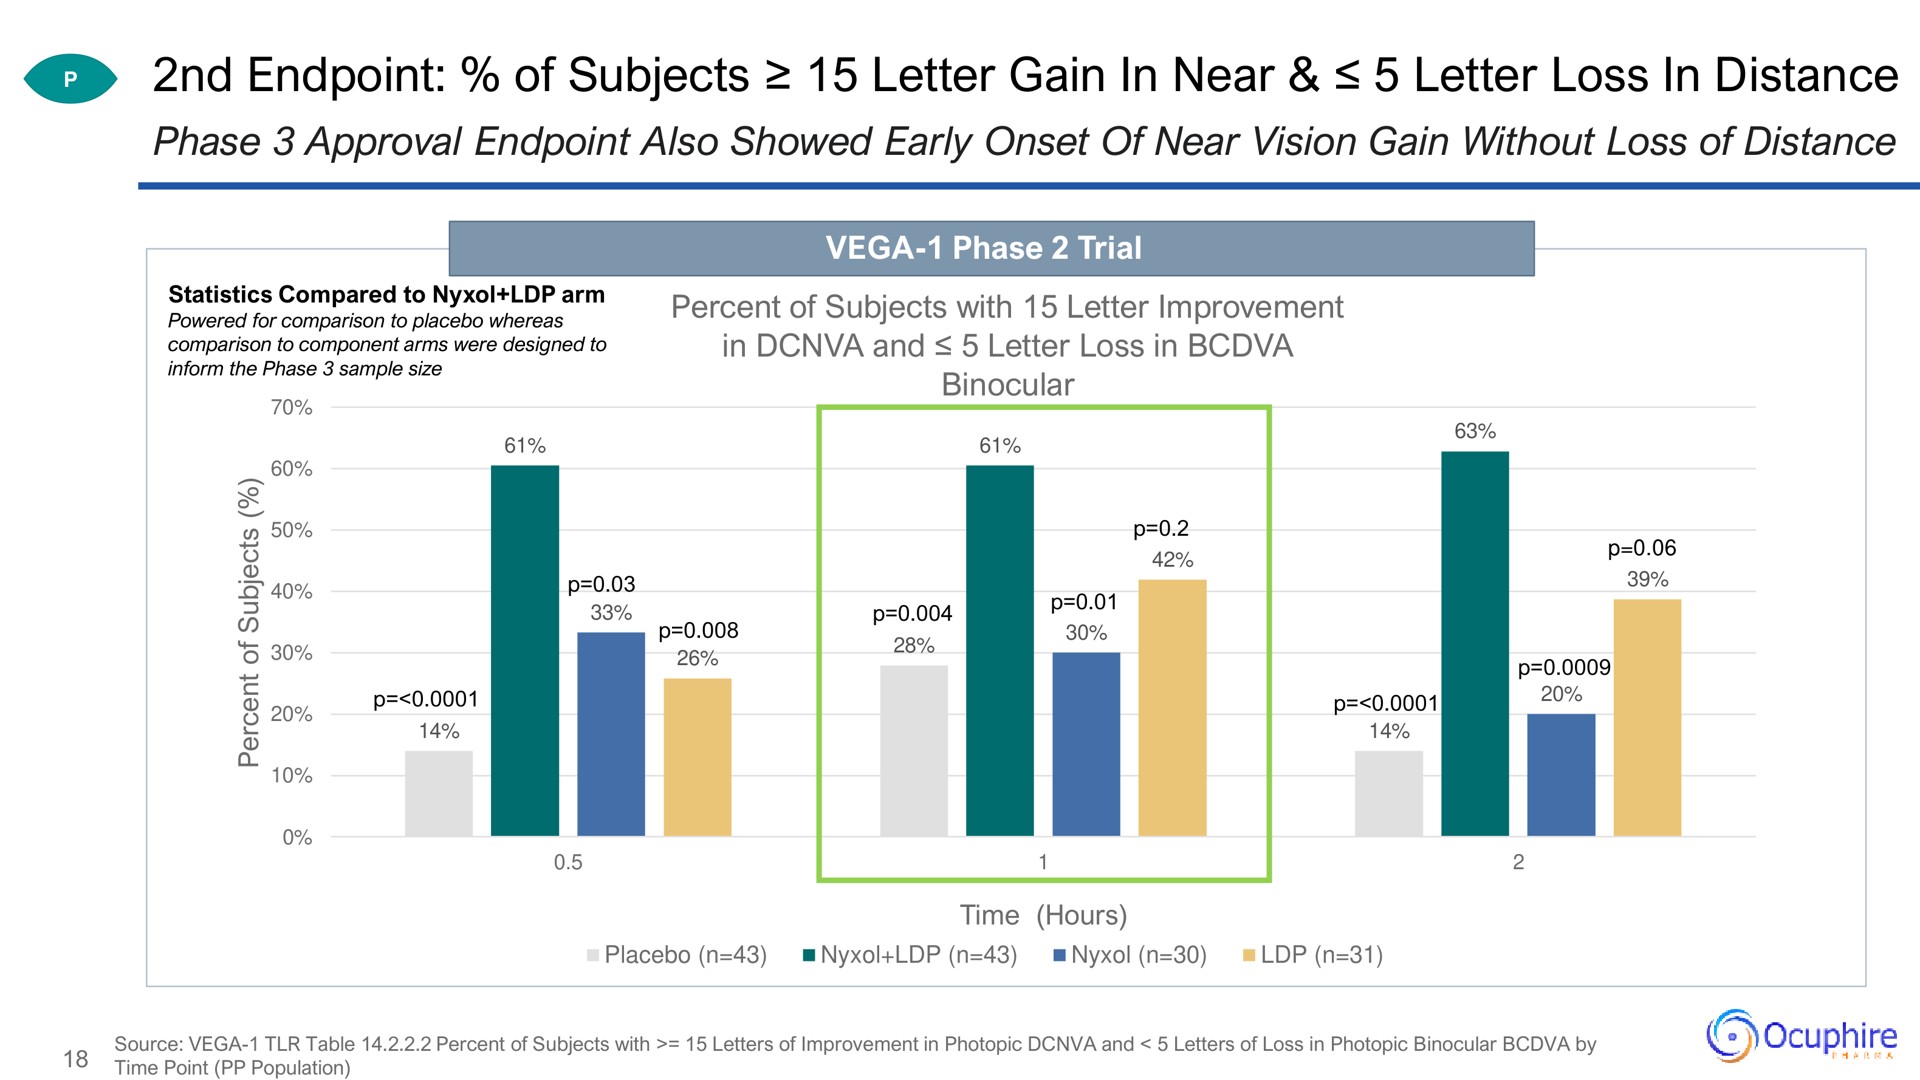 of subjects letter gain in near letter loss in distance | Ocuphire Pharma